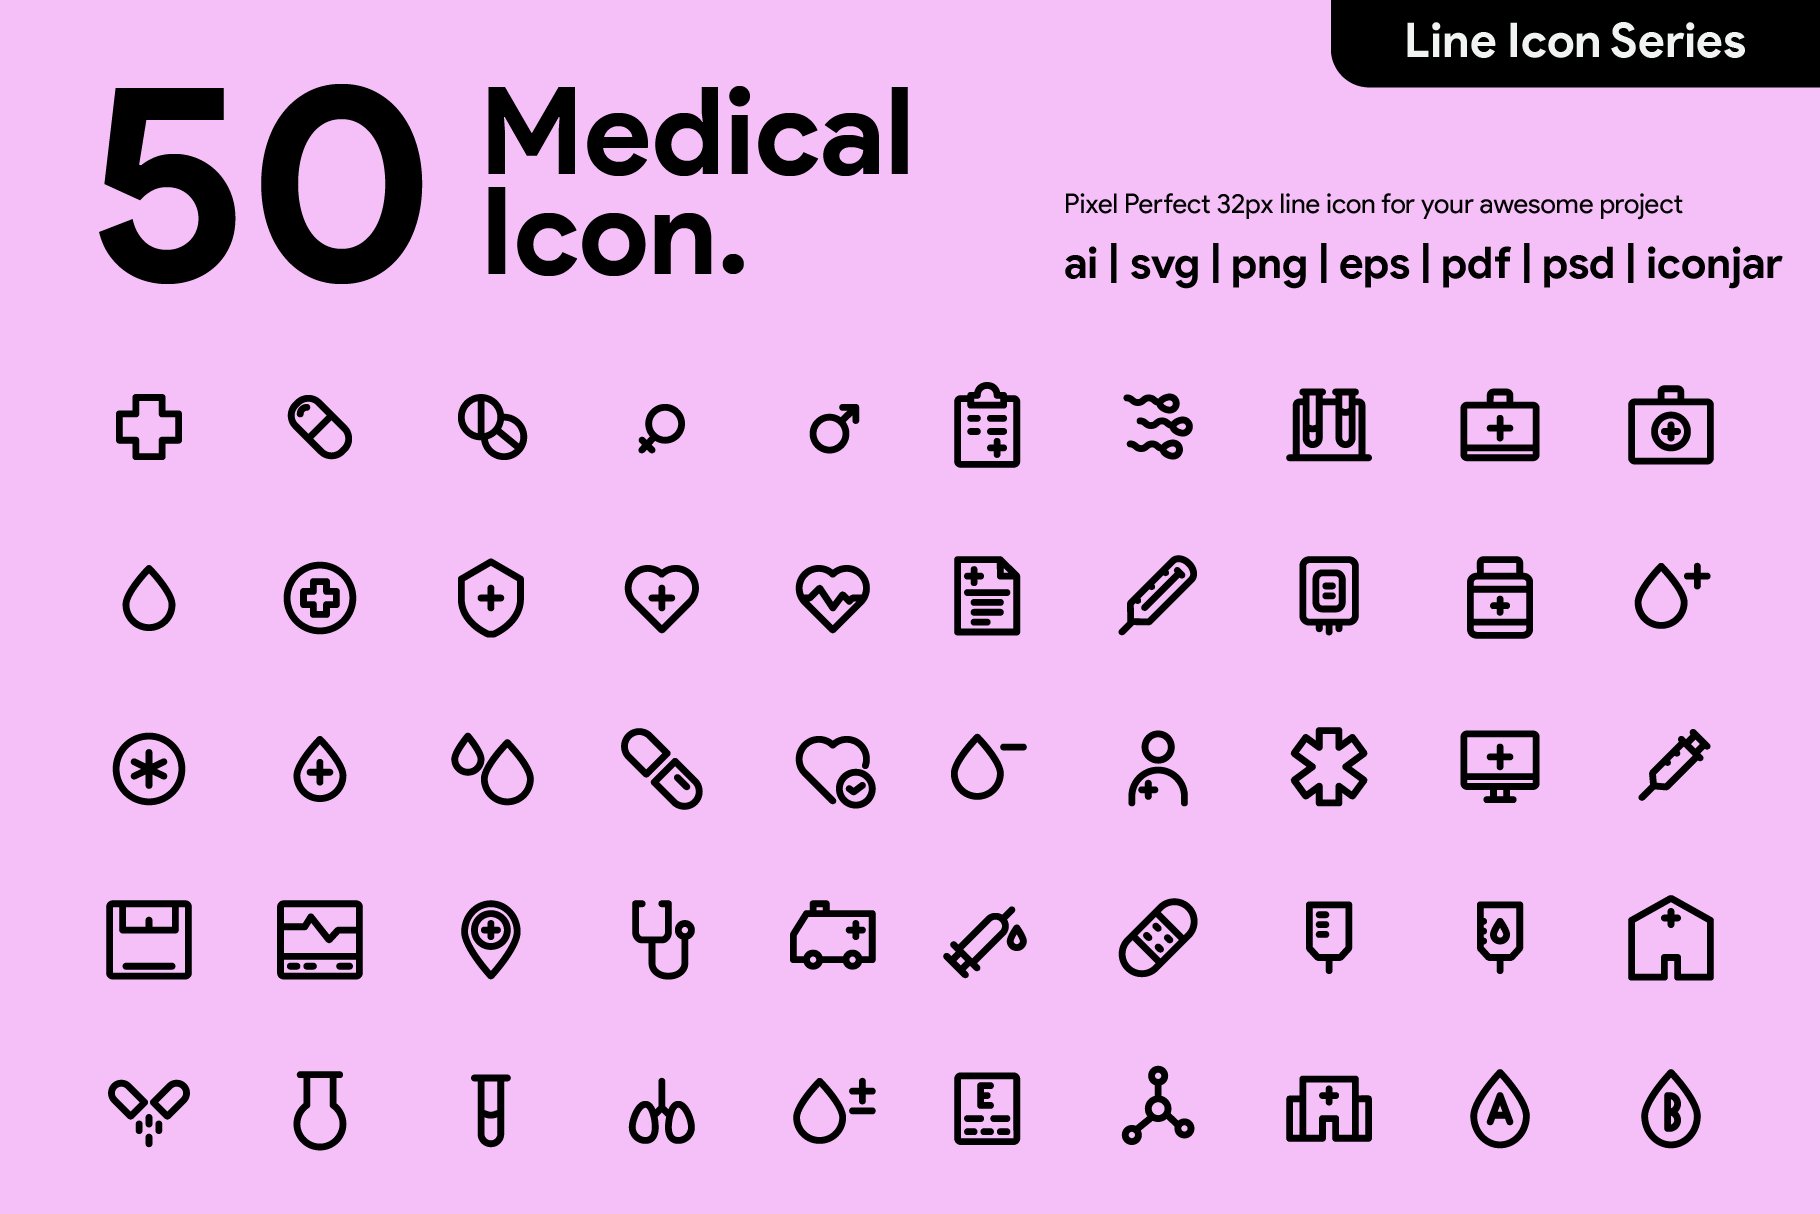 50 Medical Line Icon cover image.